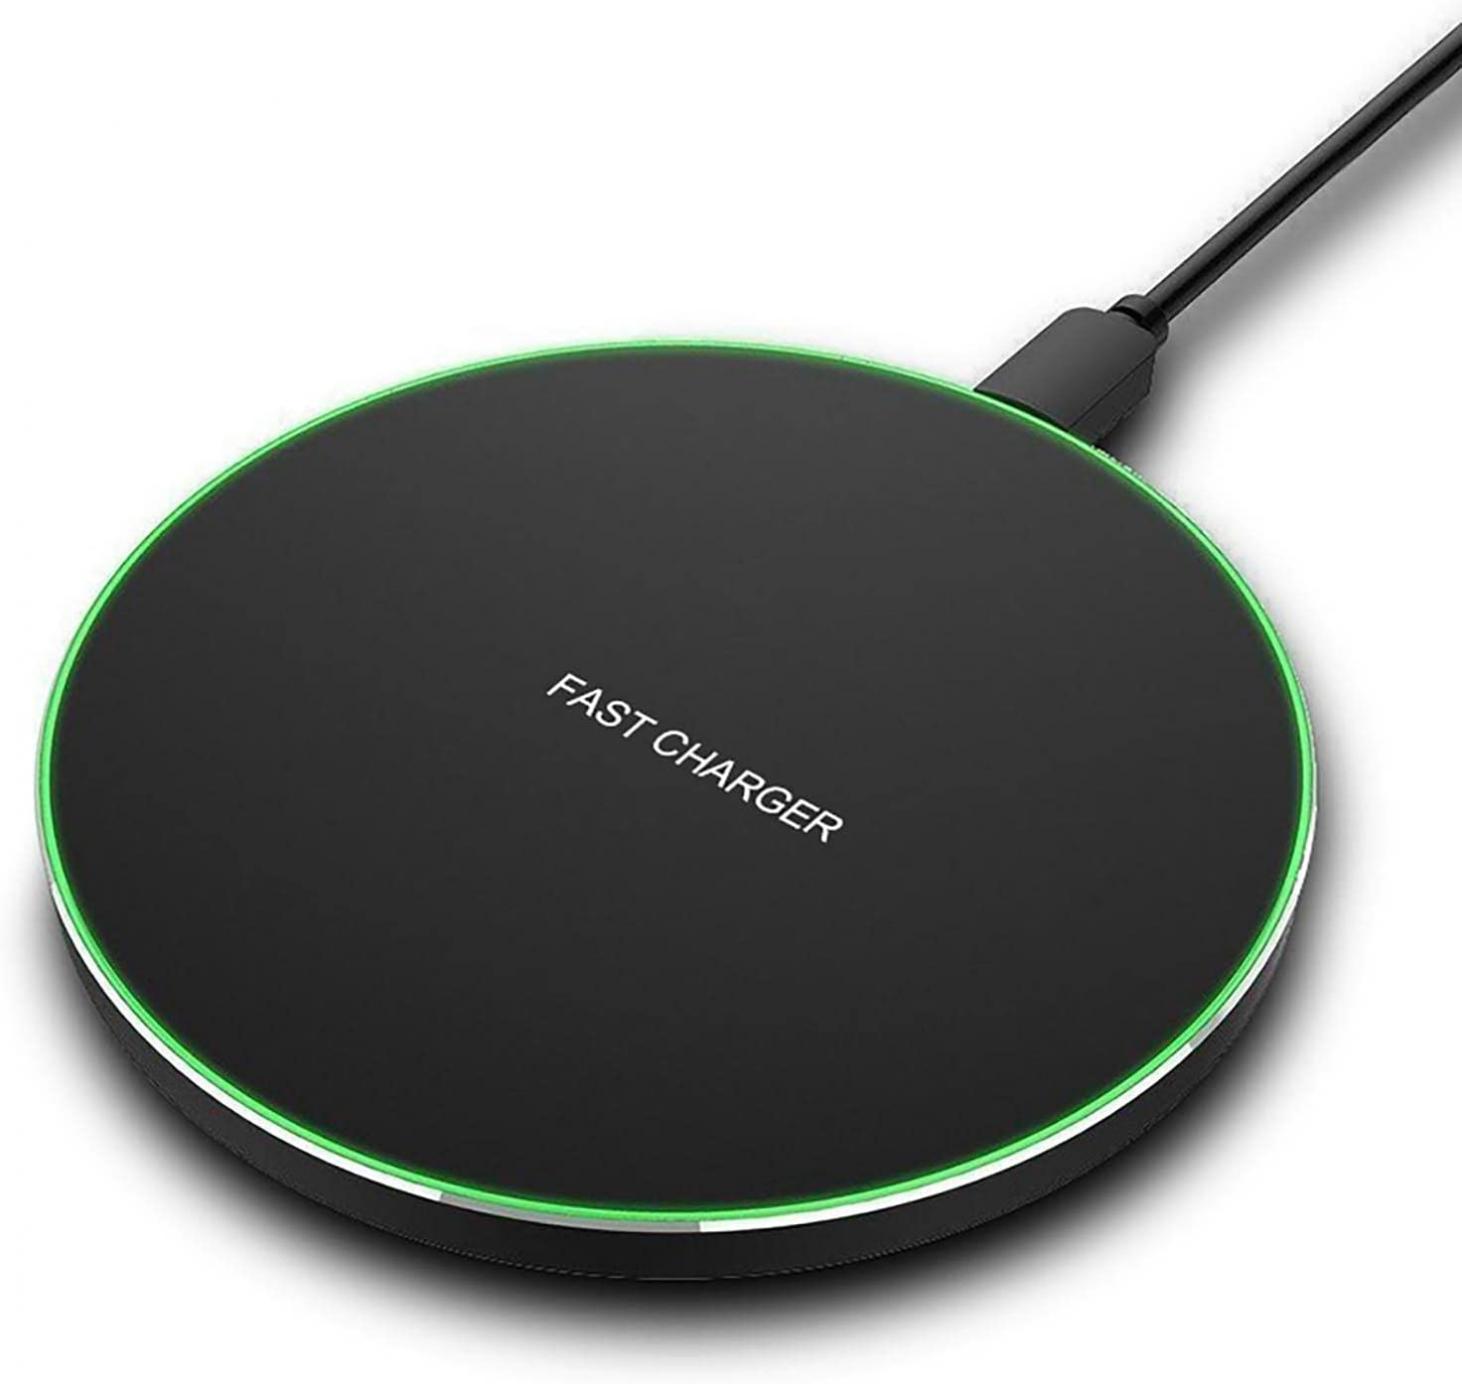 Fast Wireless Charger,20W Max Qi-Certified Wireless Charging Pad Compatible with Apple iPhone 13/14/12/SE/11/X/XR,AirPods;FDGAO 15W Wireless Charge Mats for Samsung Galaxy/Note S21/S20/S9,Galaxy Buds